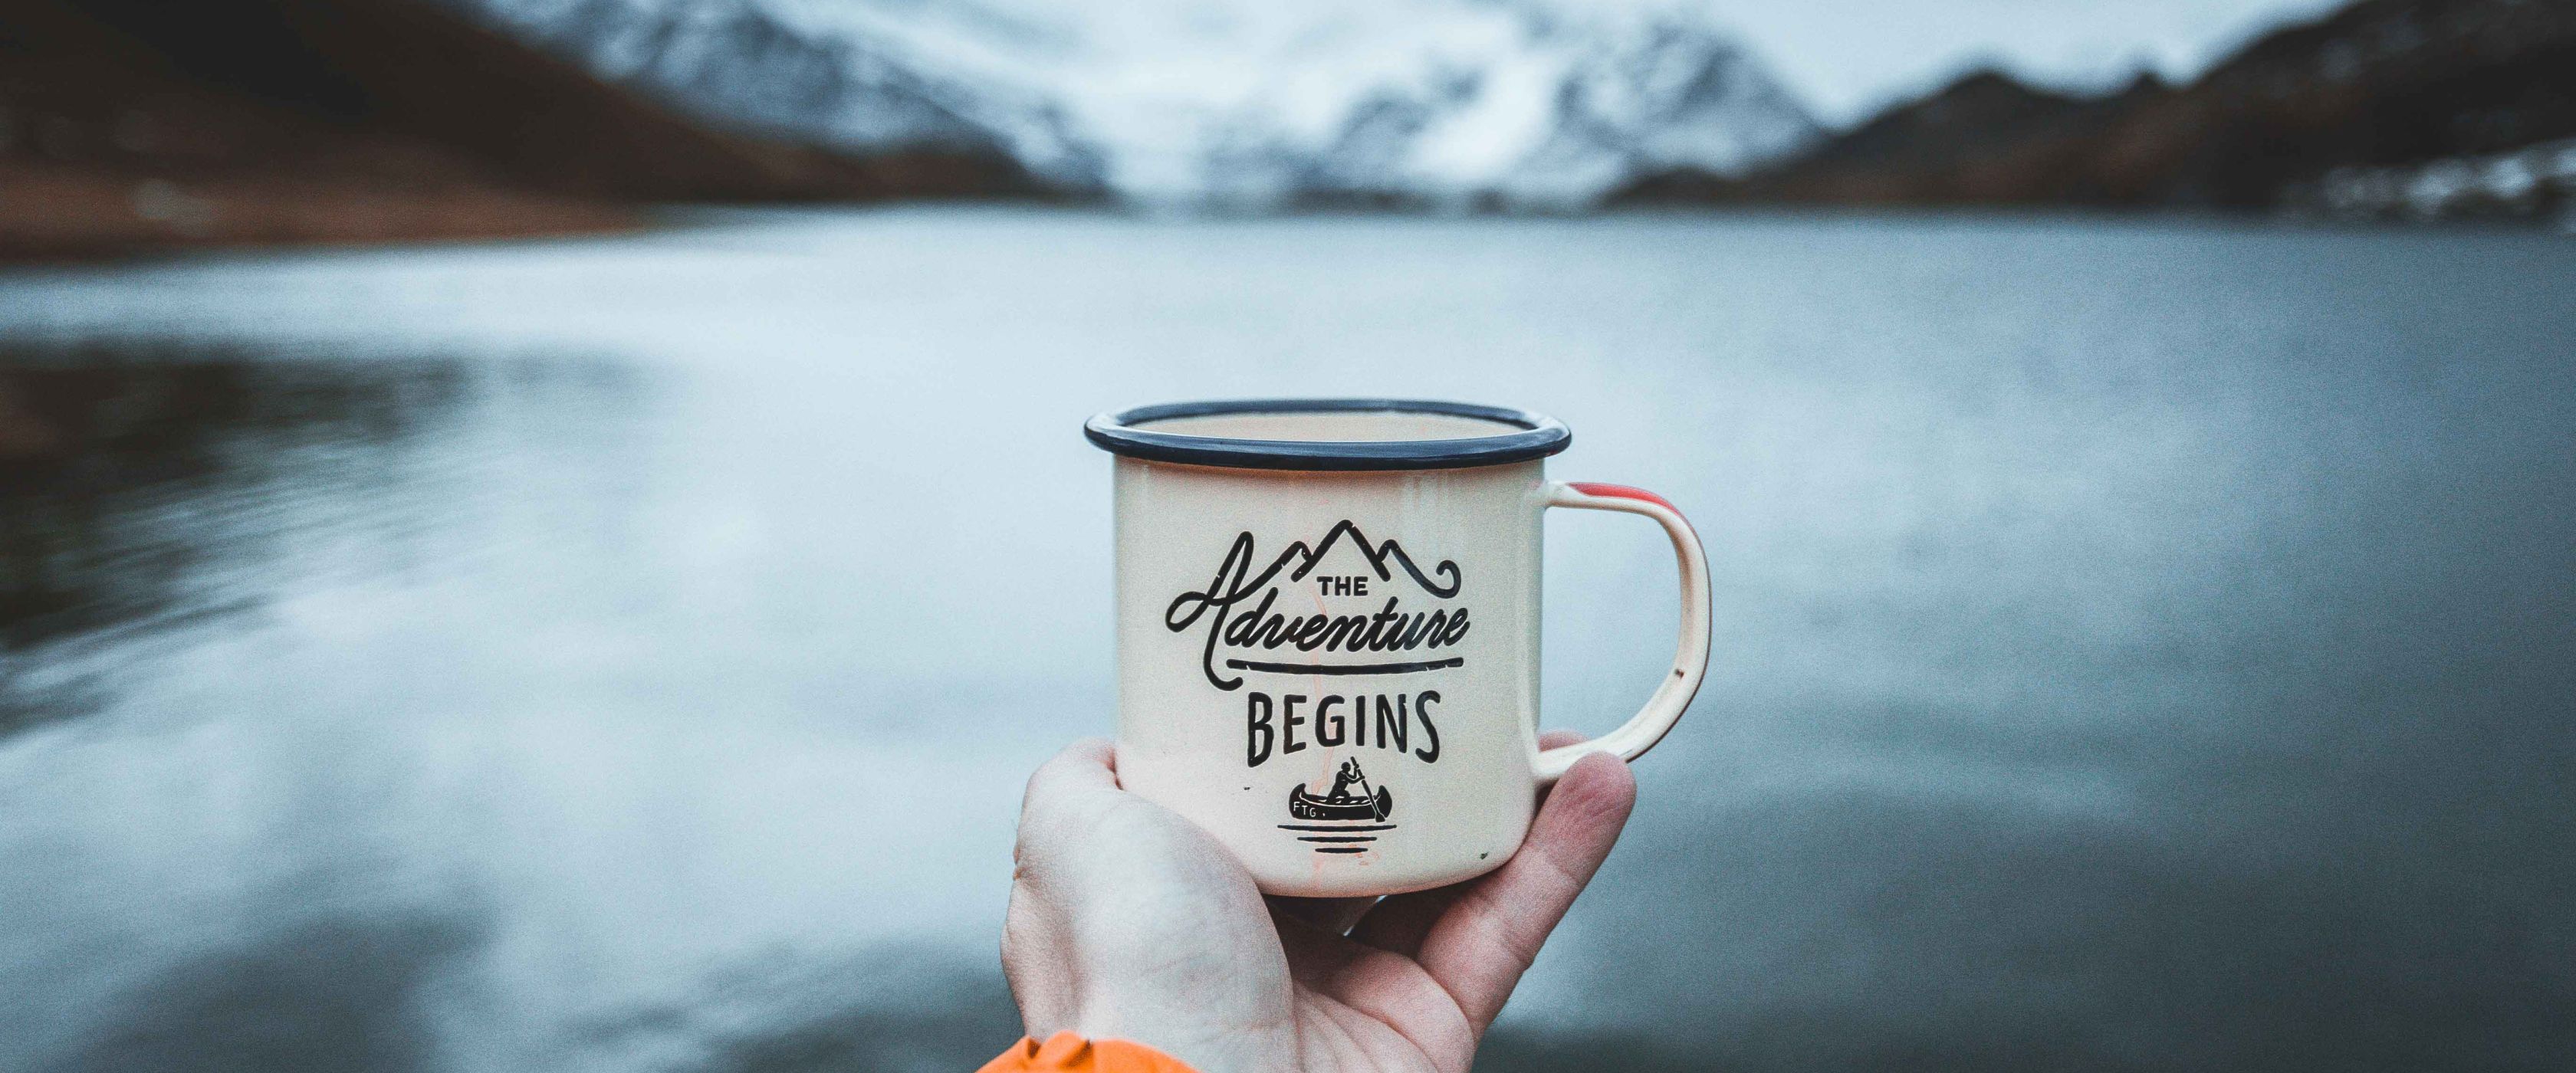 Someone holding mug in front of a lake